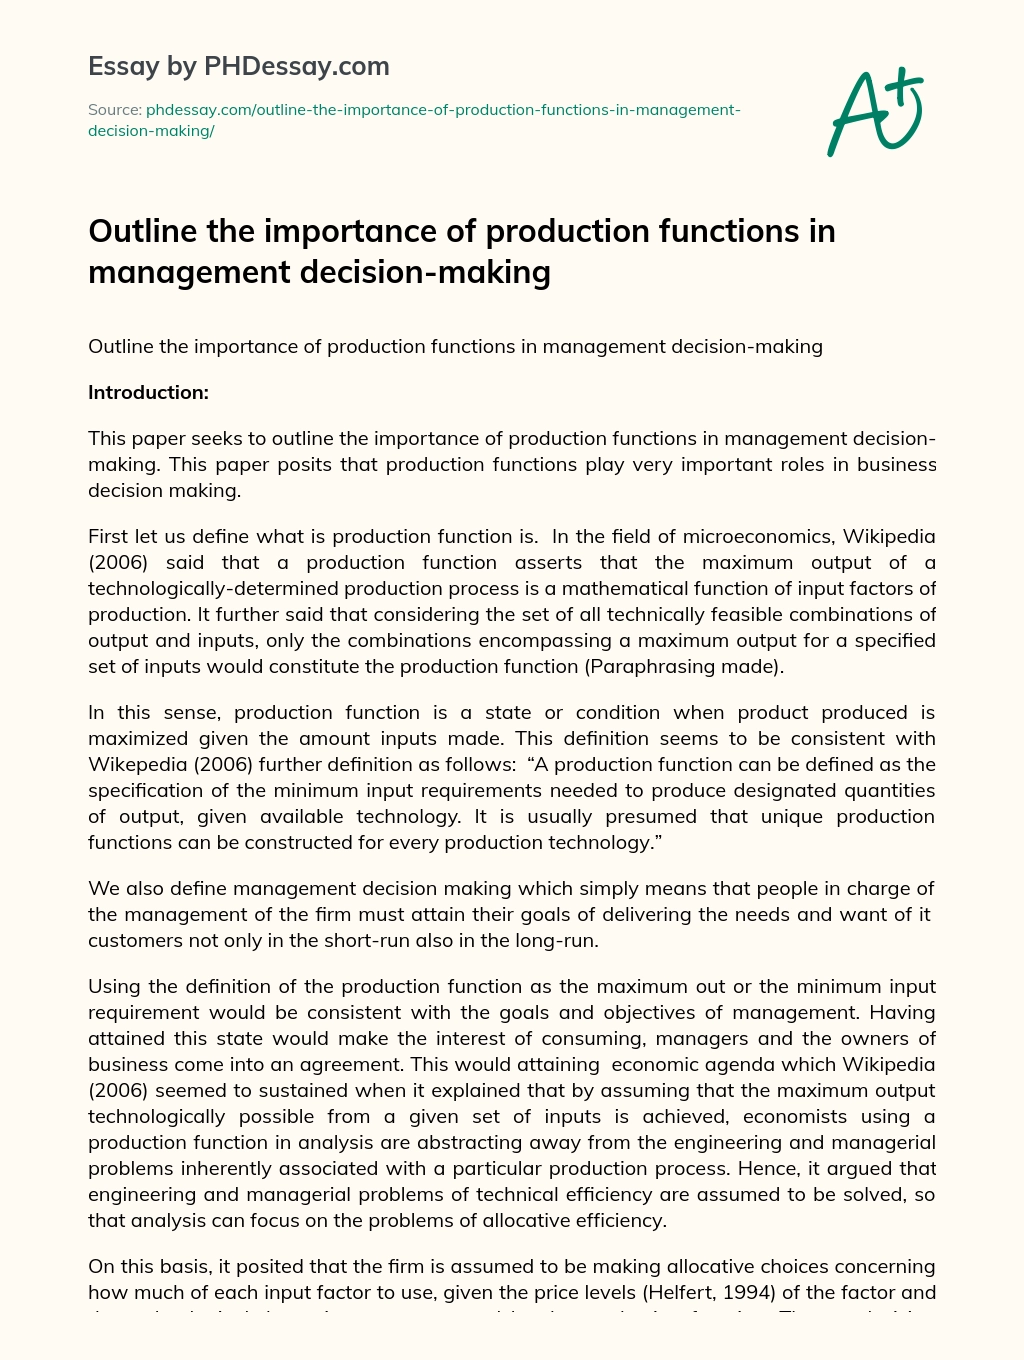 Outline the importance of production functions in management decision-making essay